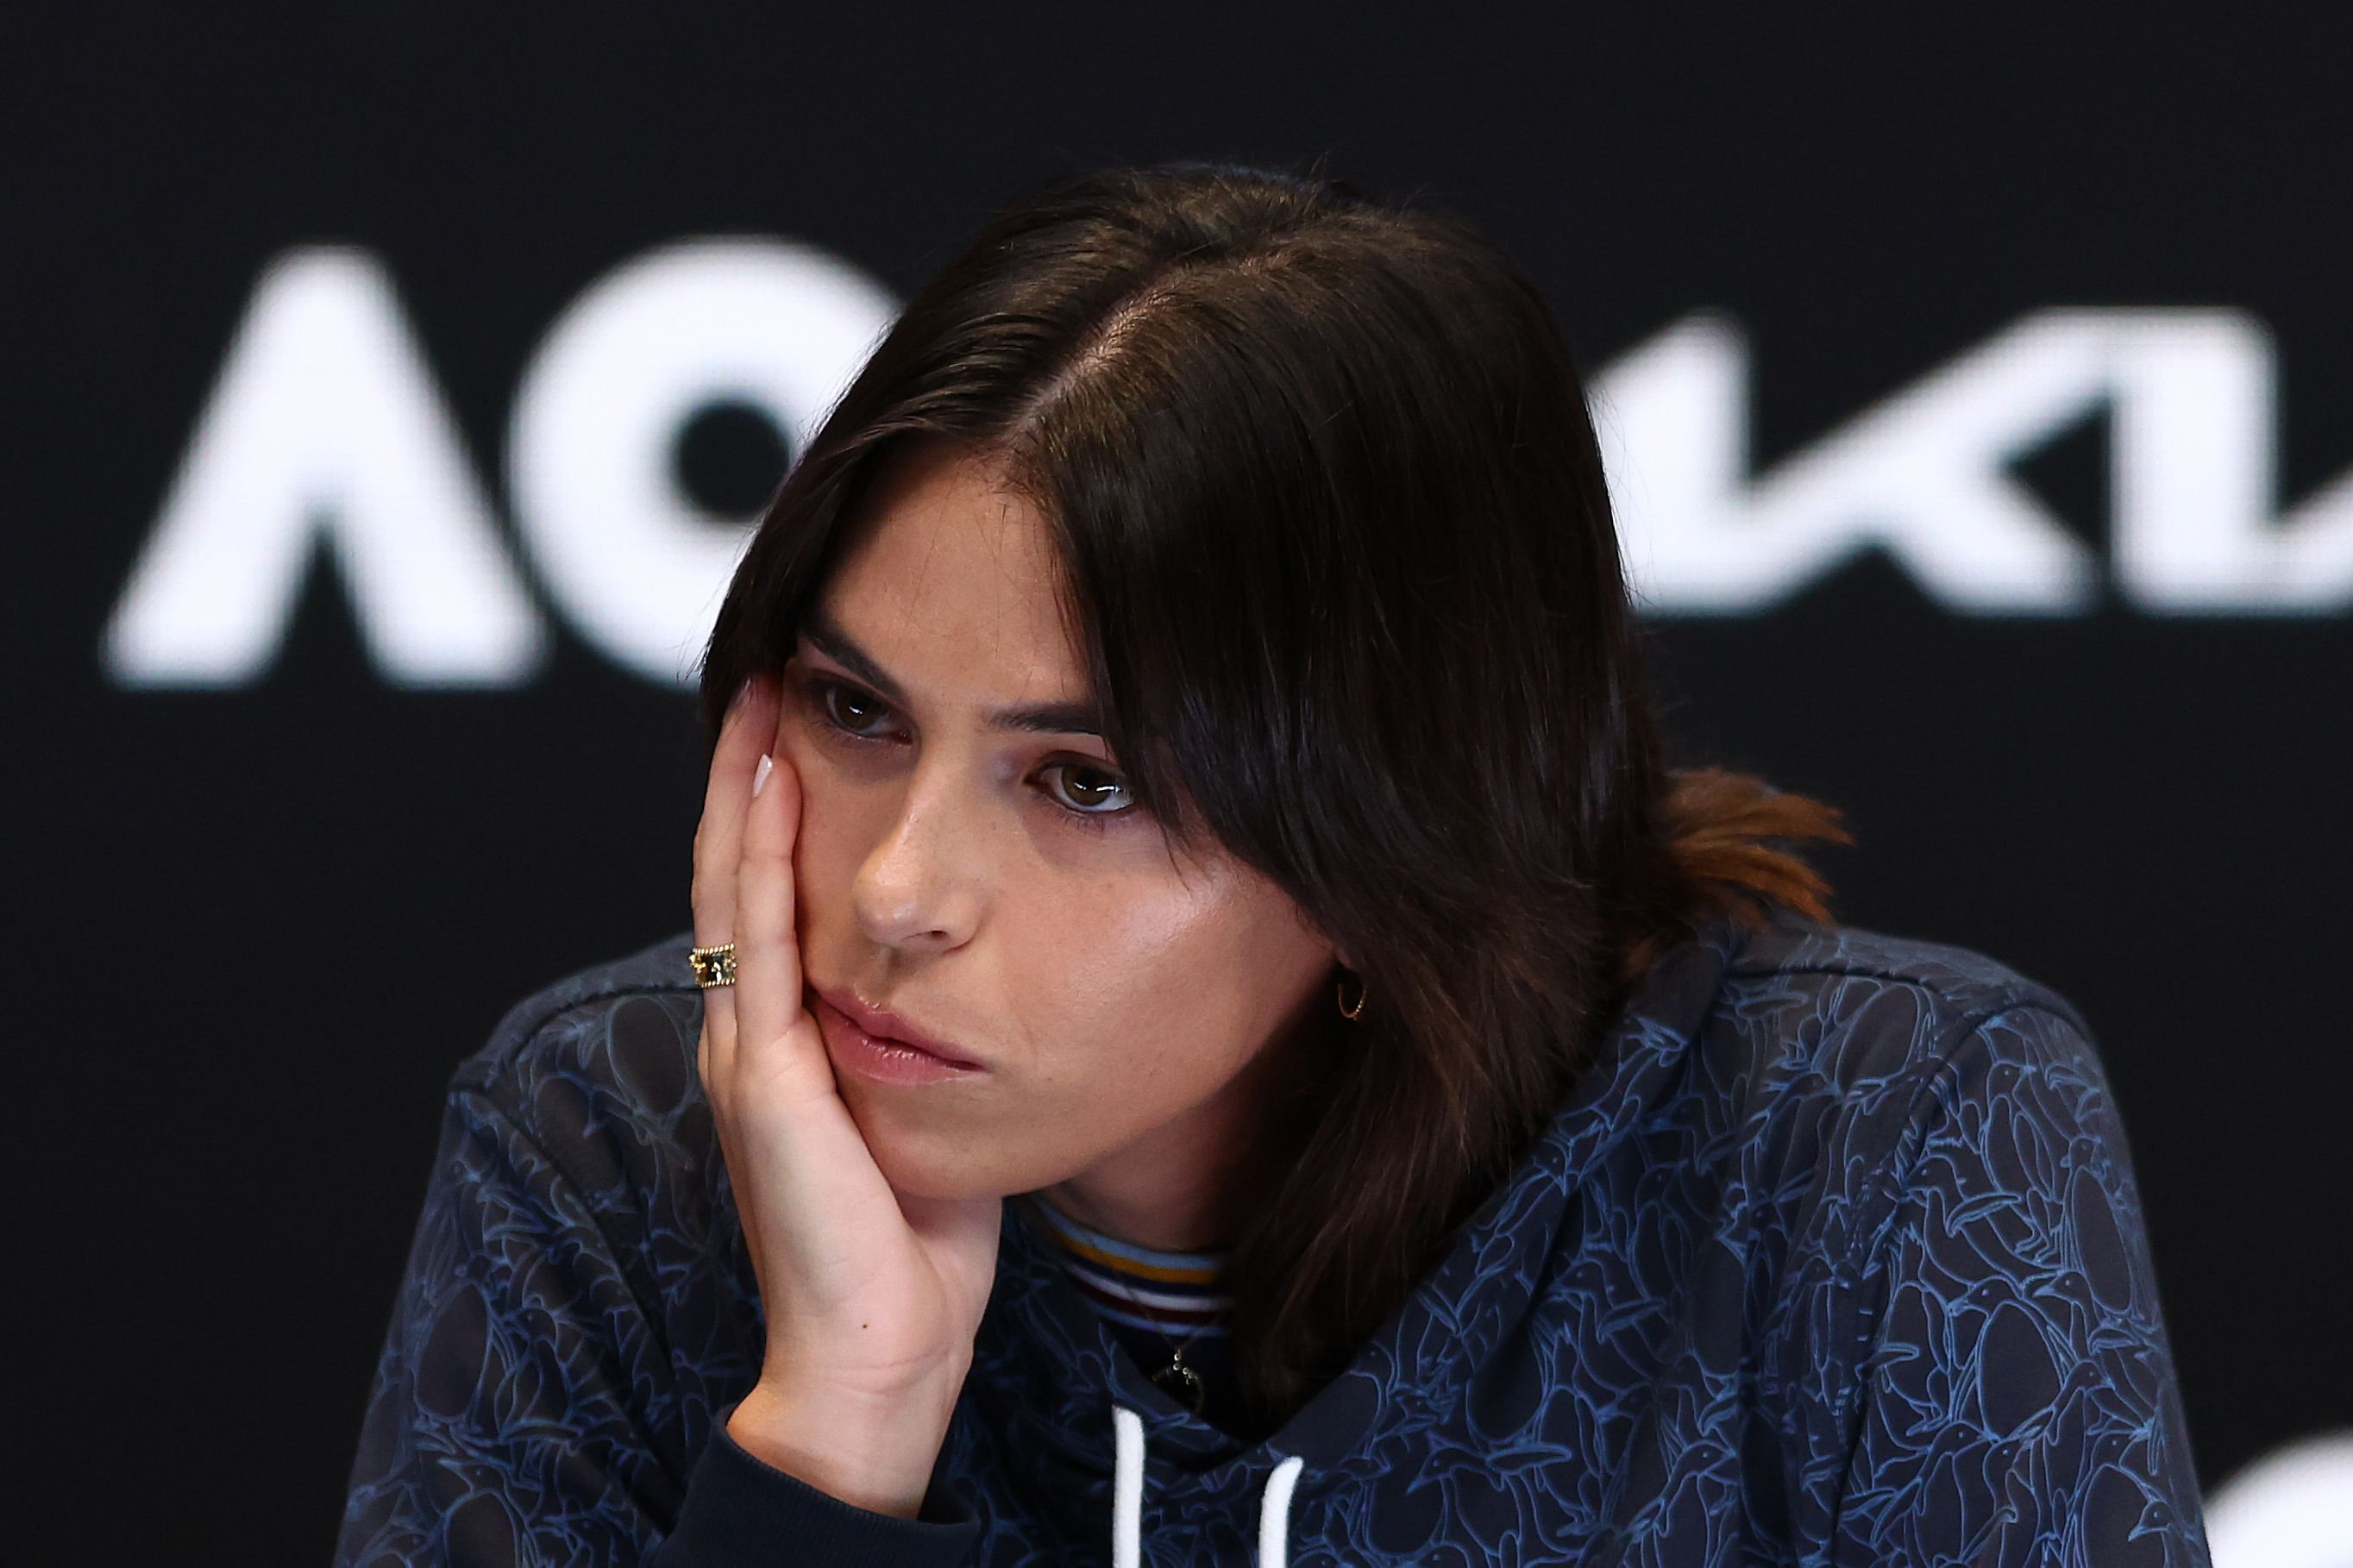 Ajla Tomljanovic forced to withdraw from Roland-Garros to continue recovery from knee surgery